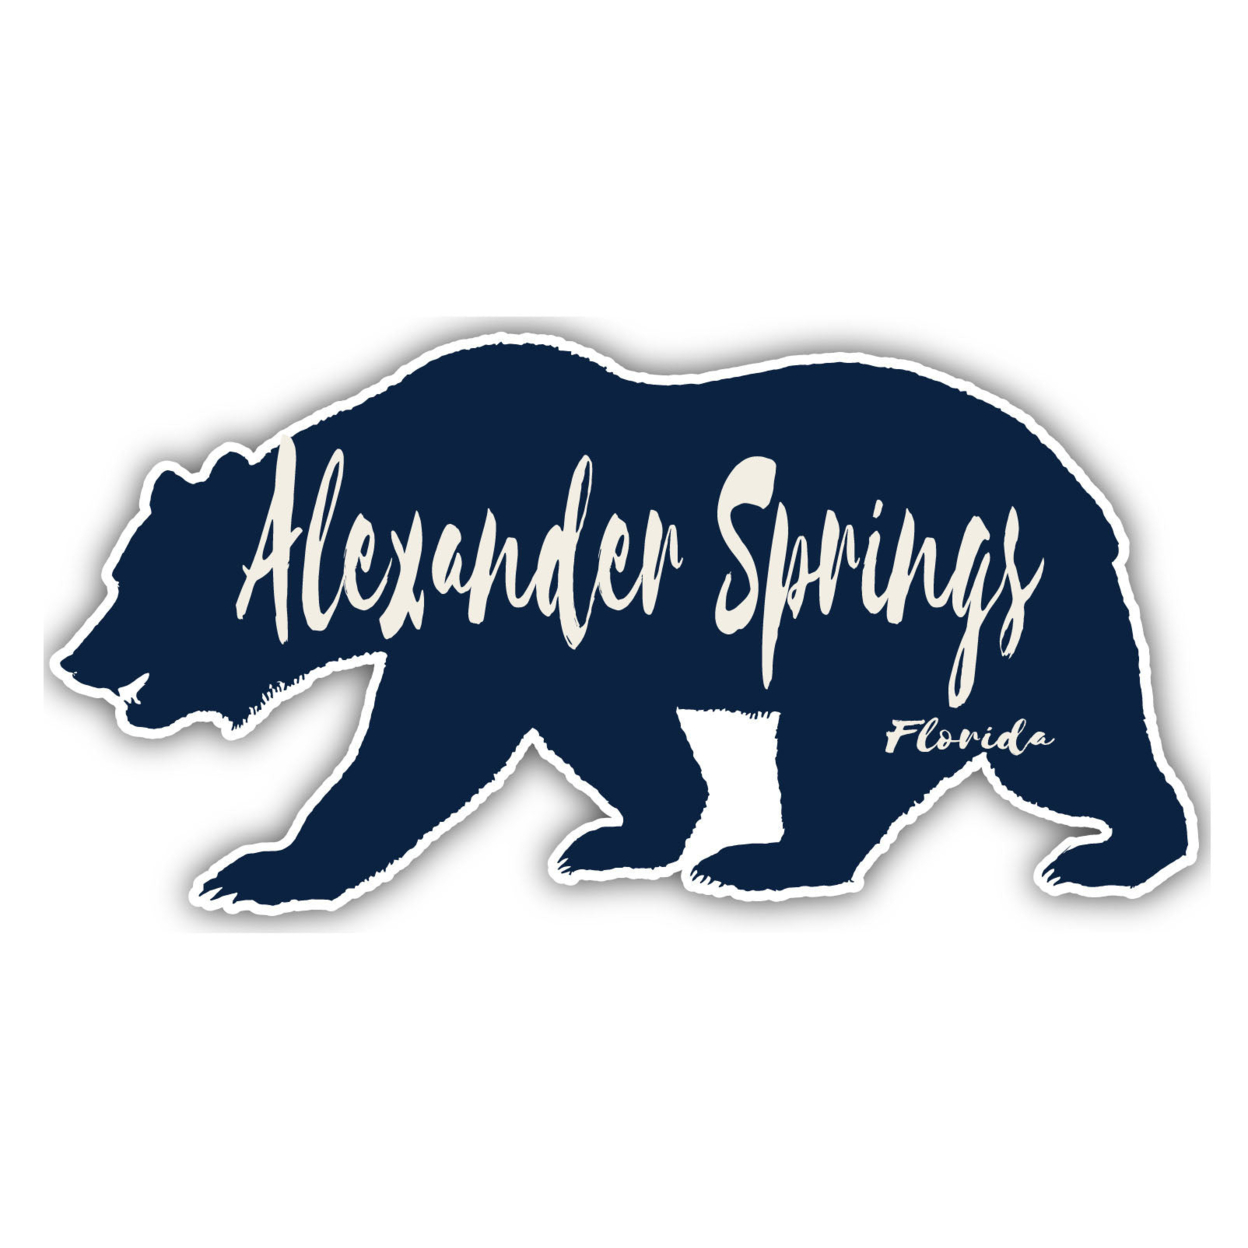 Alexander Springs Florida Souvenir Decorative Stickers (Choose Theme And Size) - 4-Pack, 6-Inch, Tent